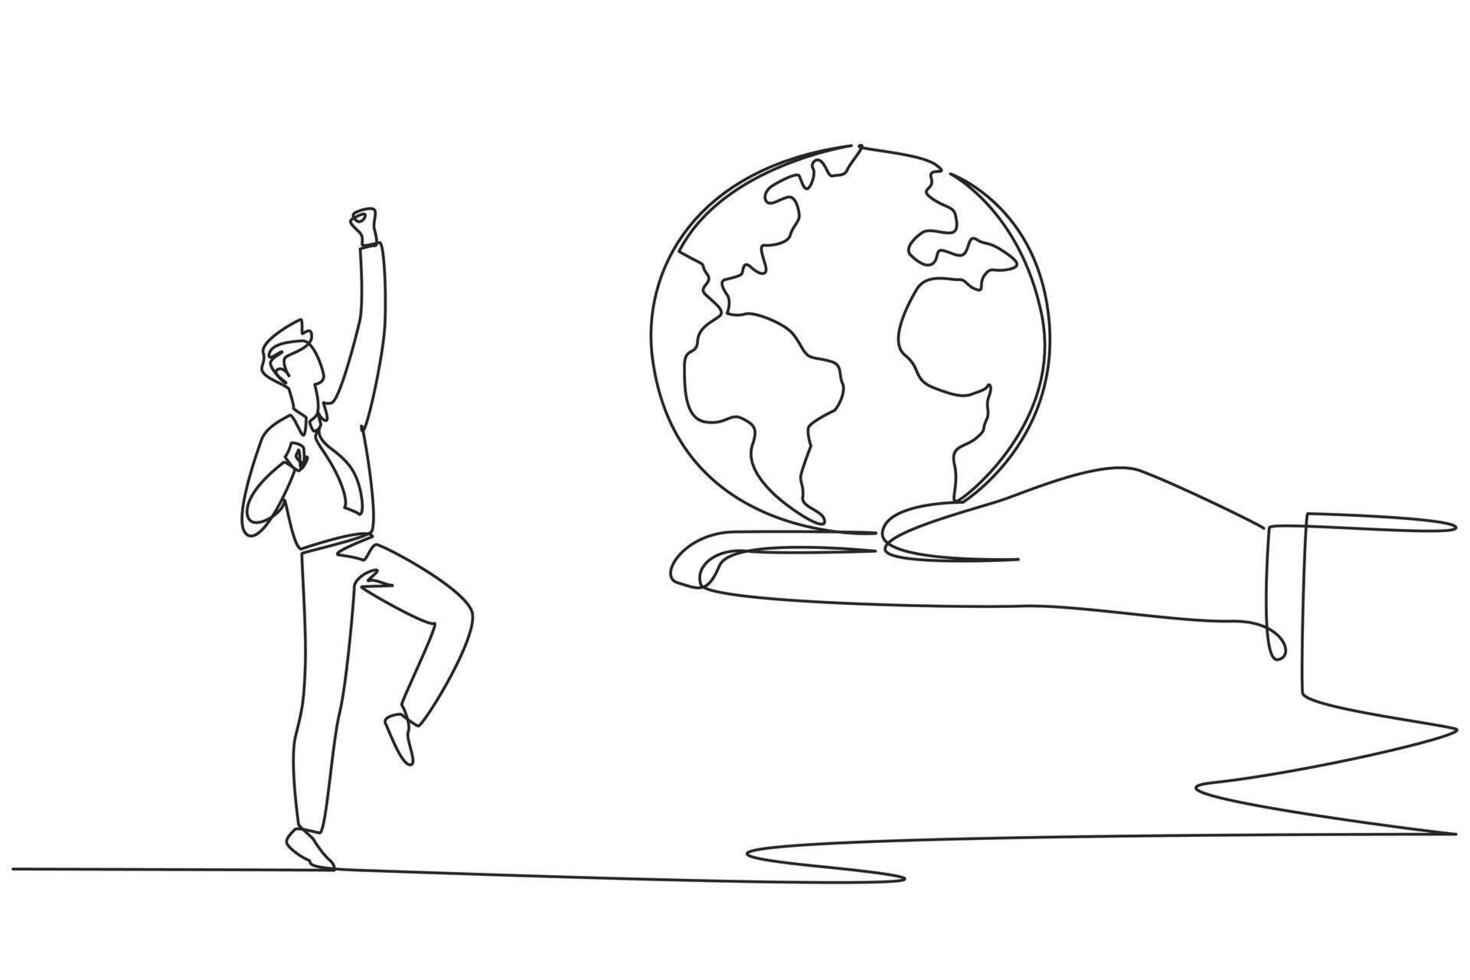 Single continuous line drawing the businessman is excited to get the globe from the giant hand. Get a promotion of positions in the newly opened business branch. One line design illustration vector